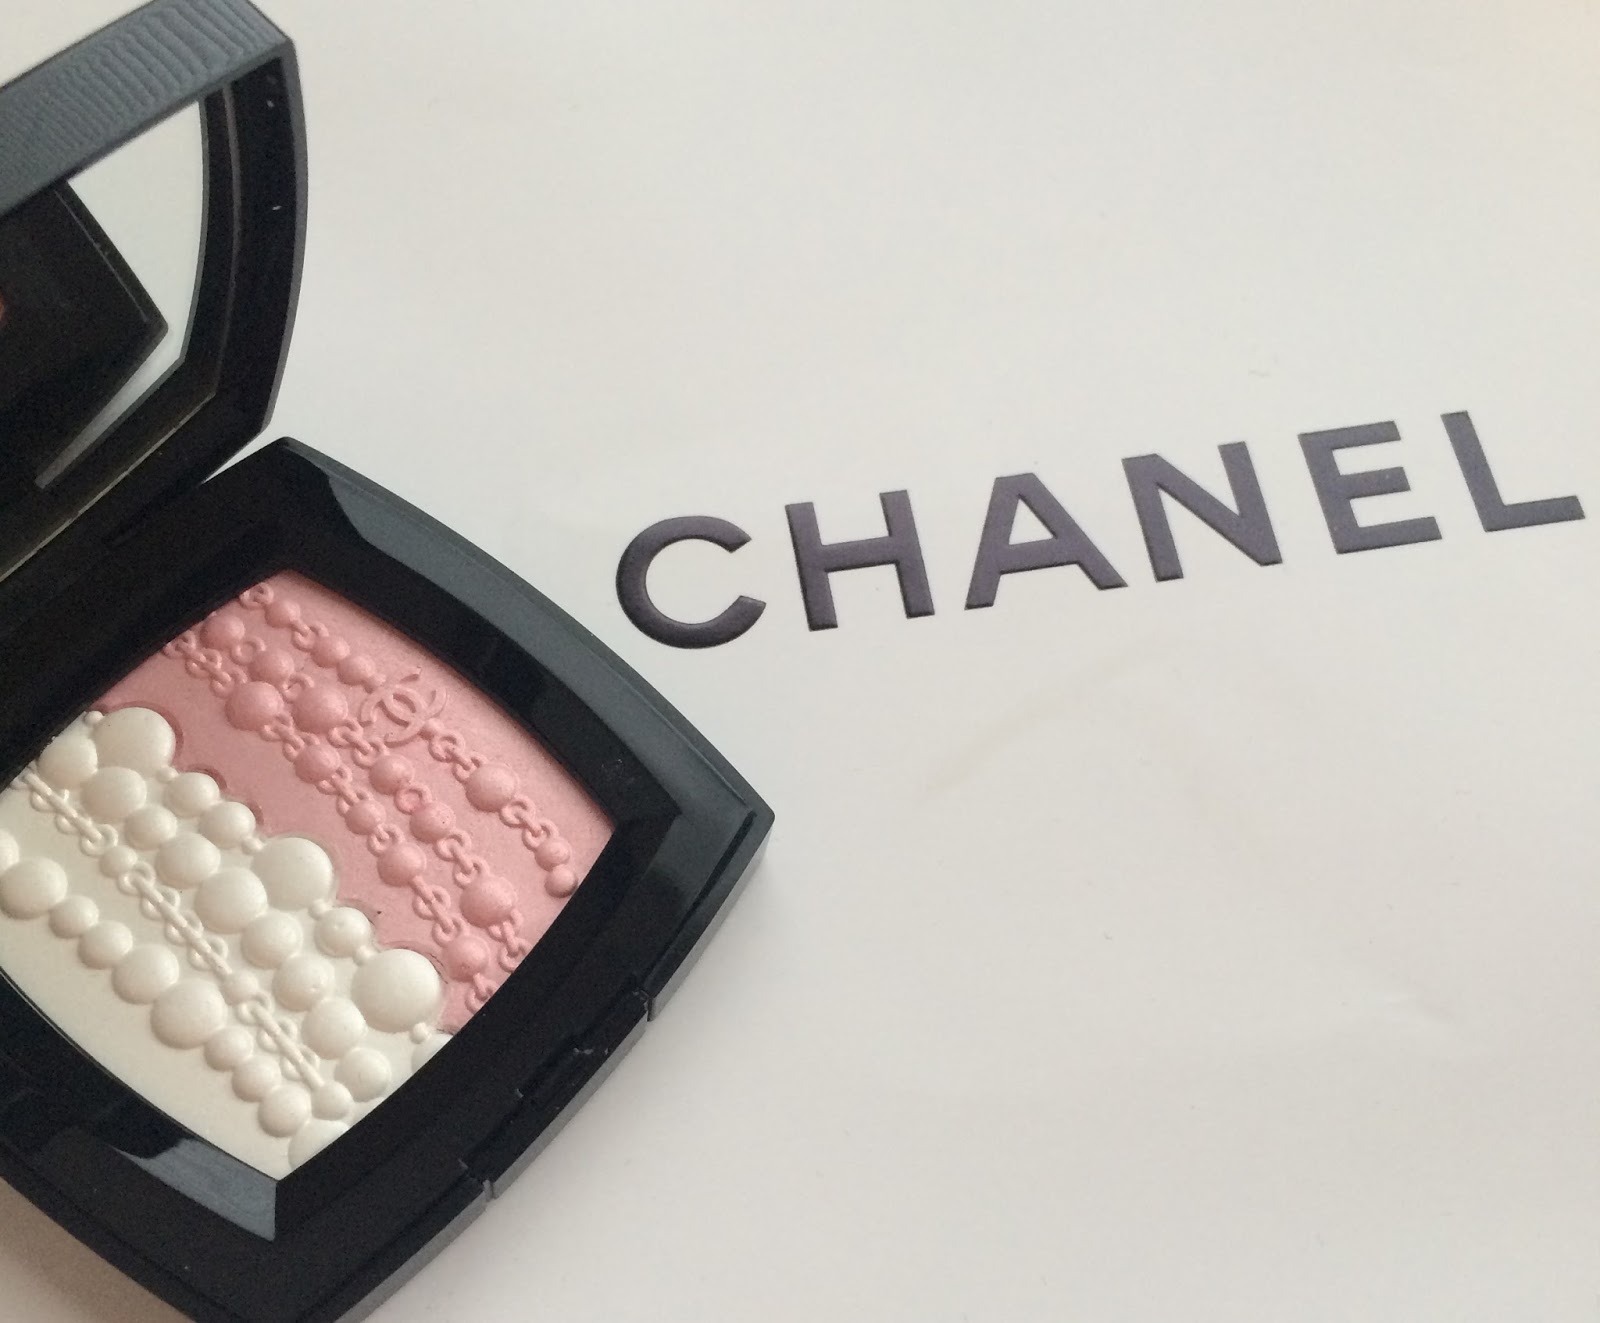 Chanel Perles et Fantaisies Illuminating Powder – a must-have for all Chanel  lovers!